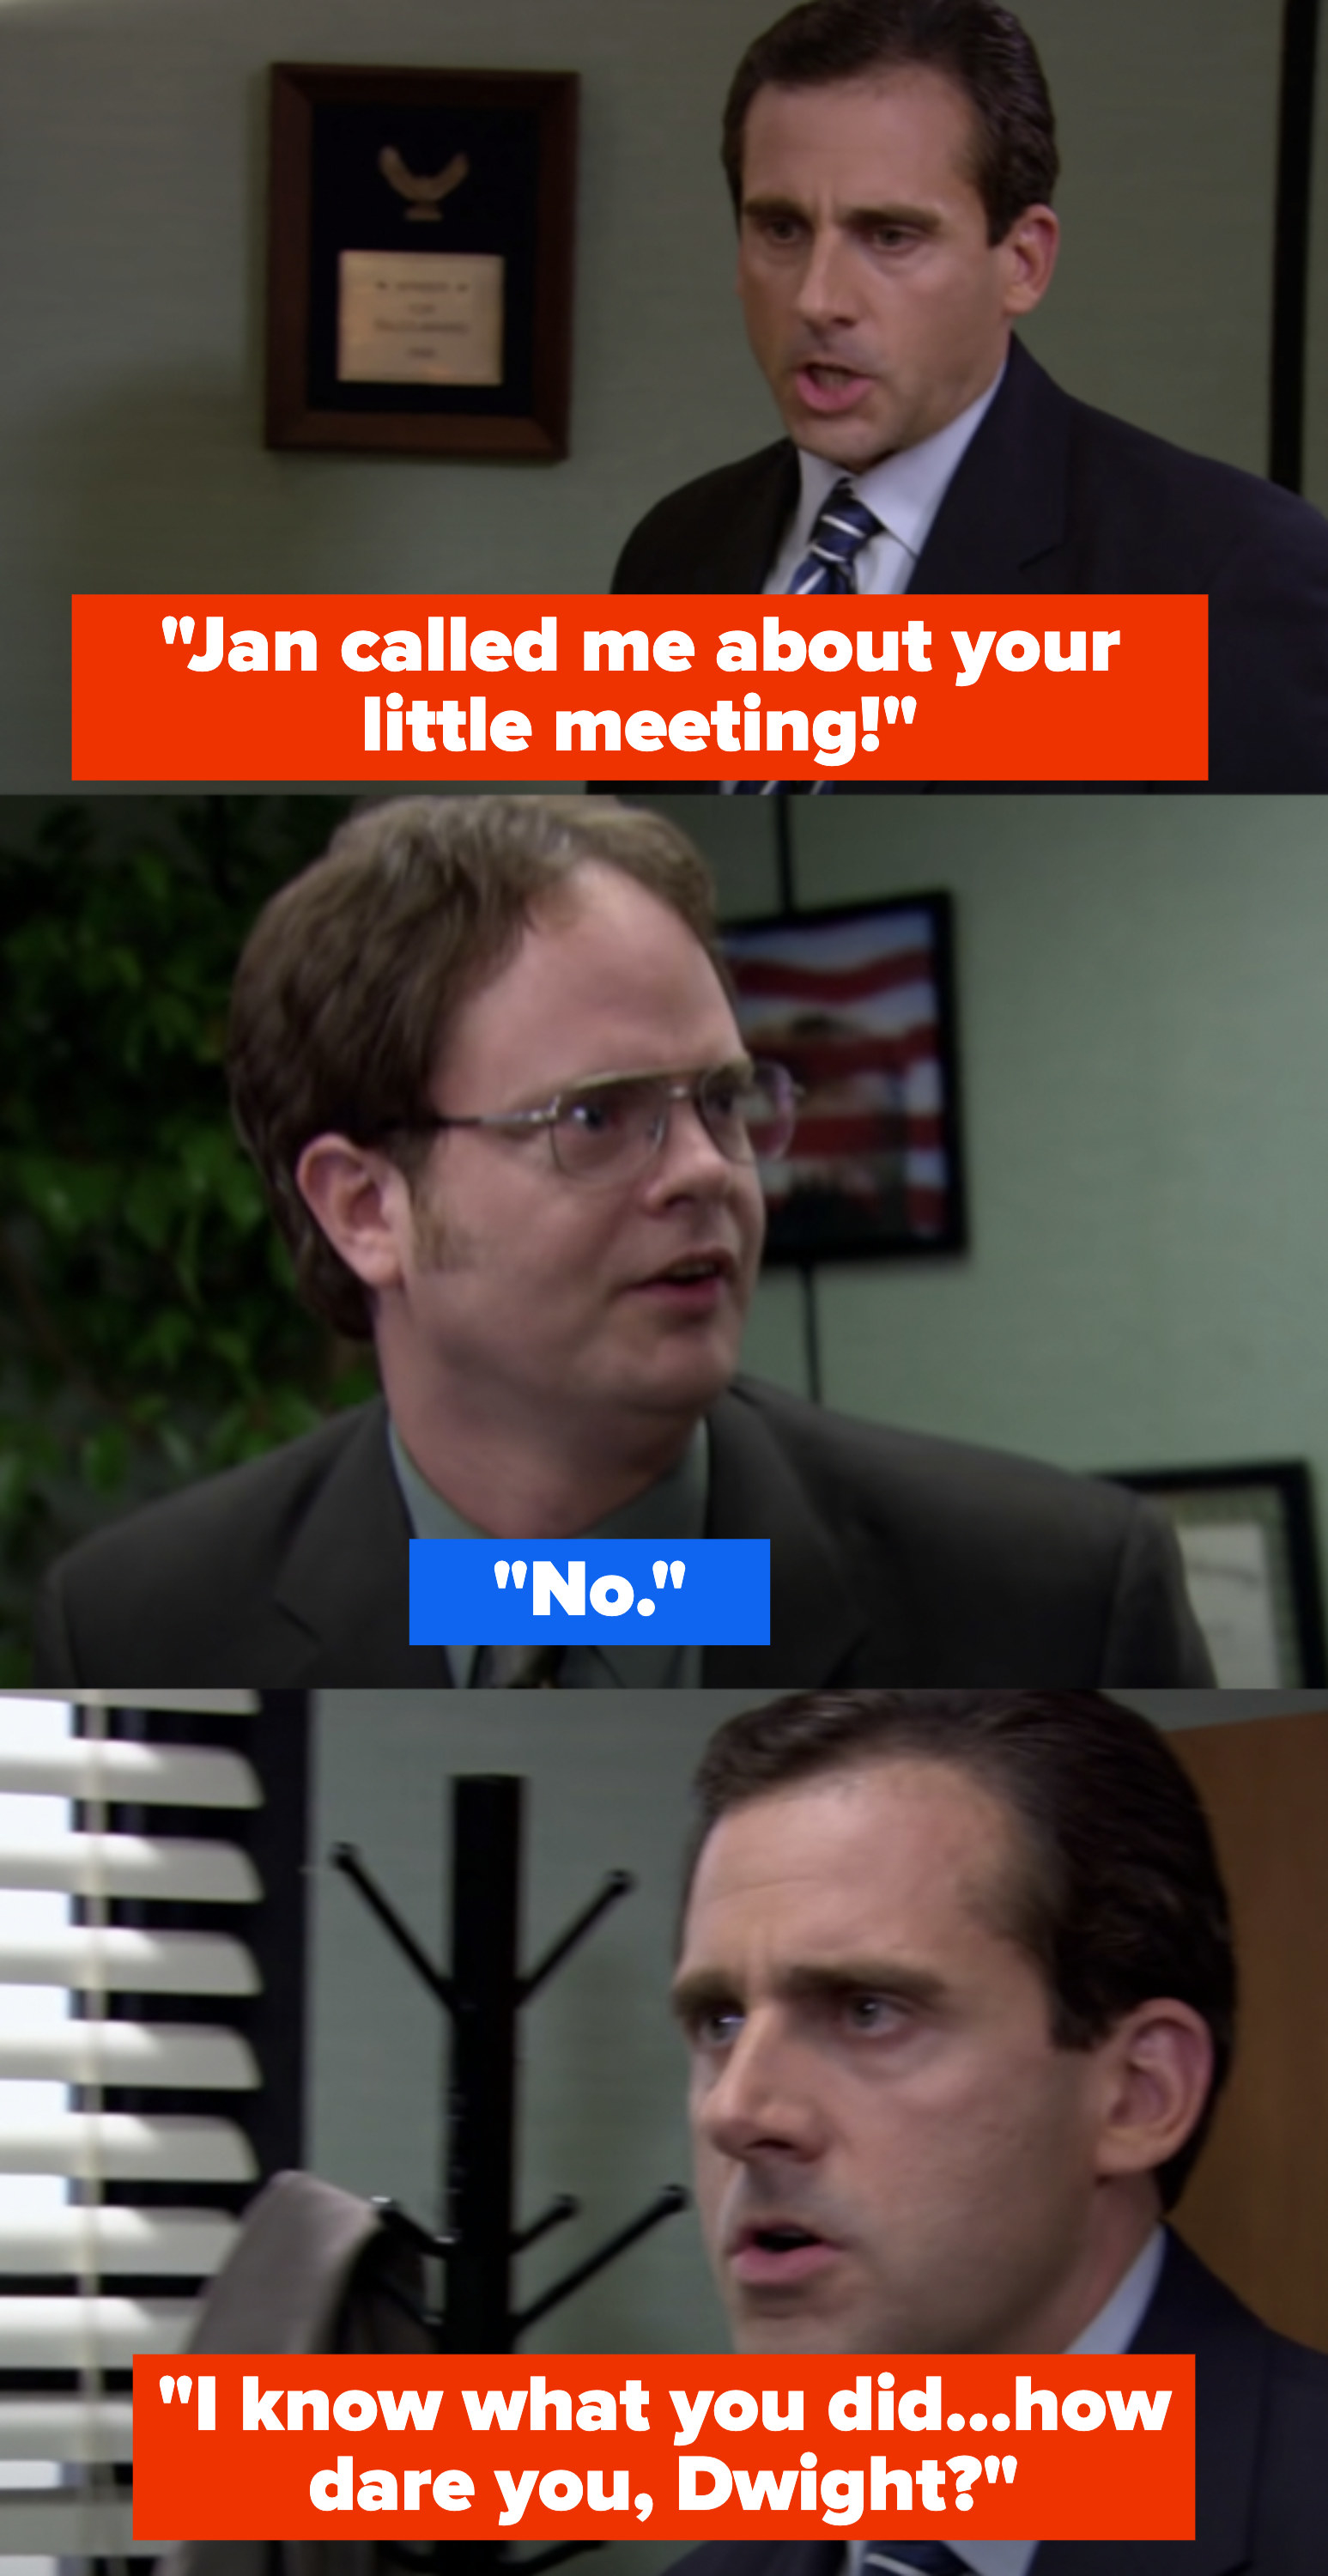 Michael tells Dwight Jan told him about their meeting and he knows what Dwight did